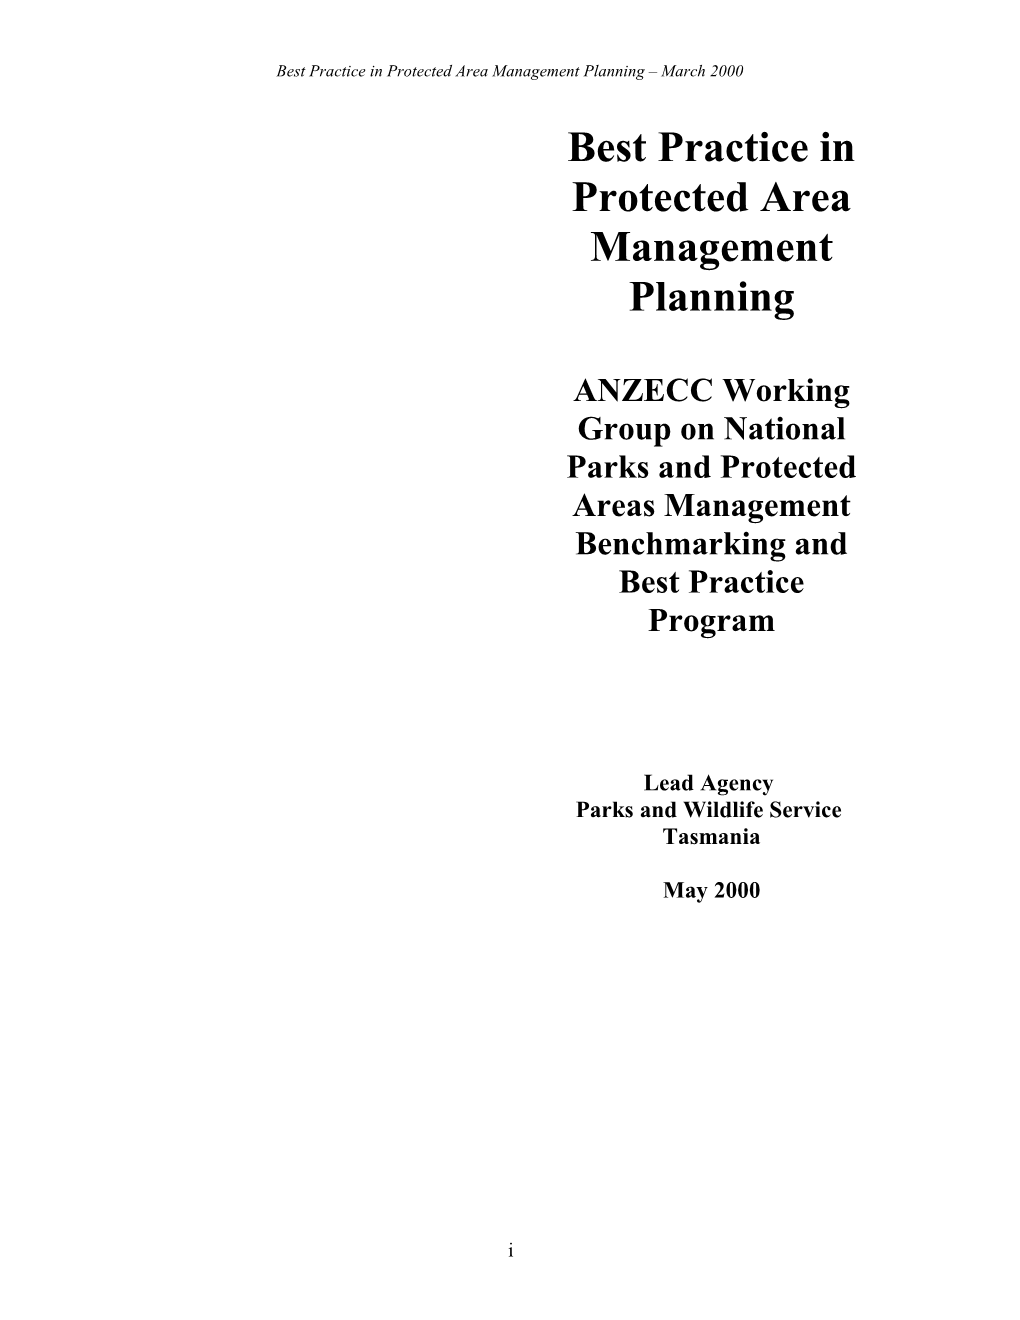 Best Practice in Protected Area Management and Planning